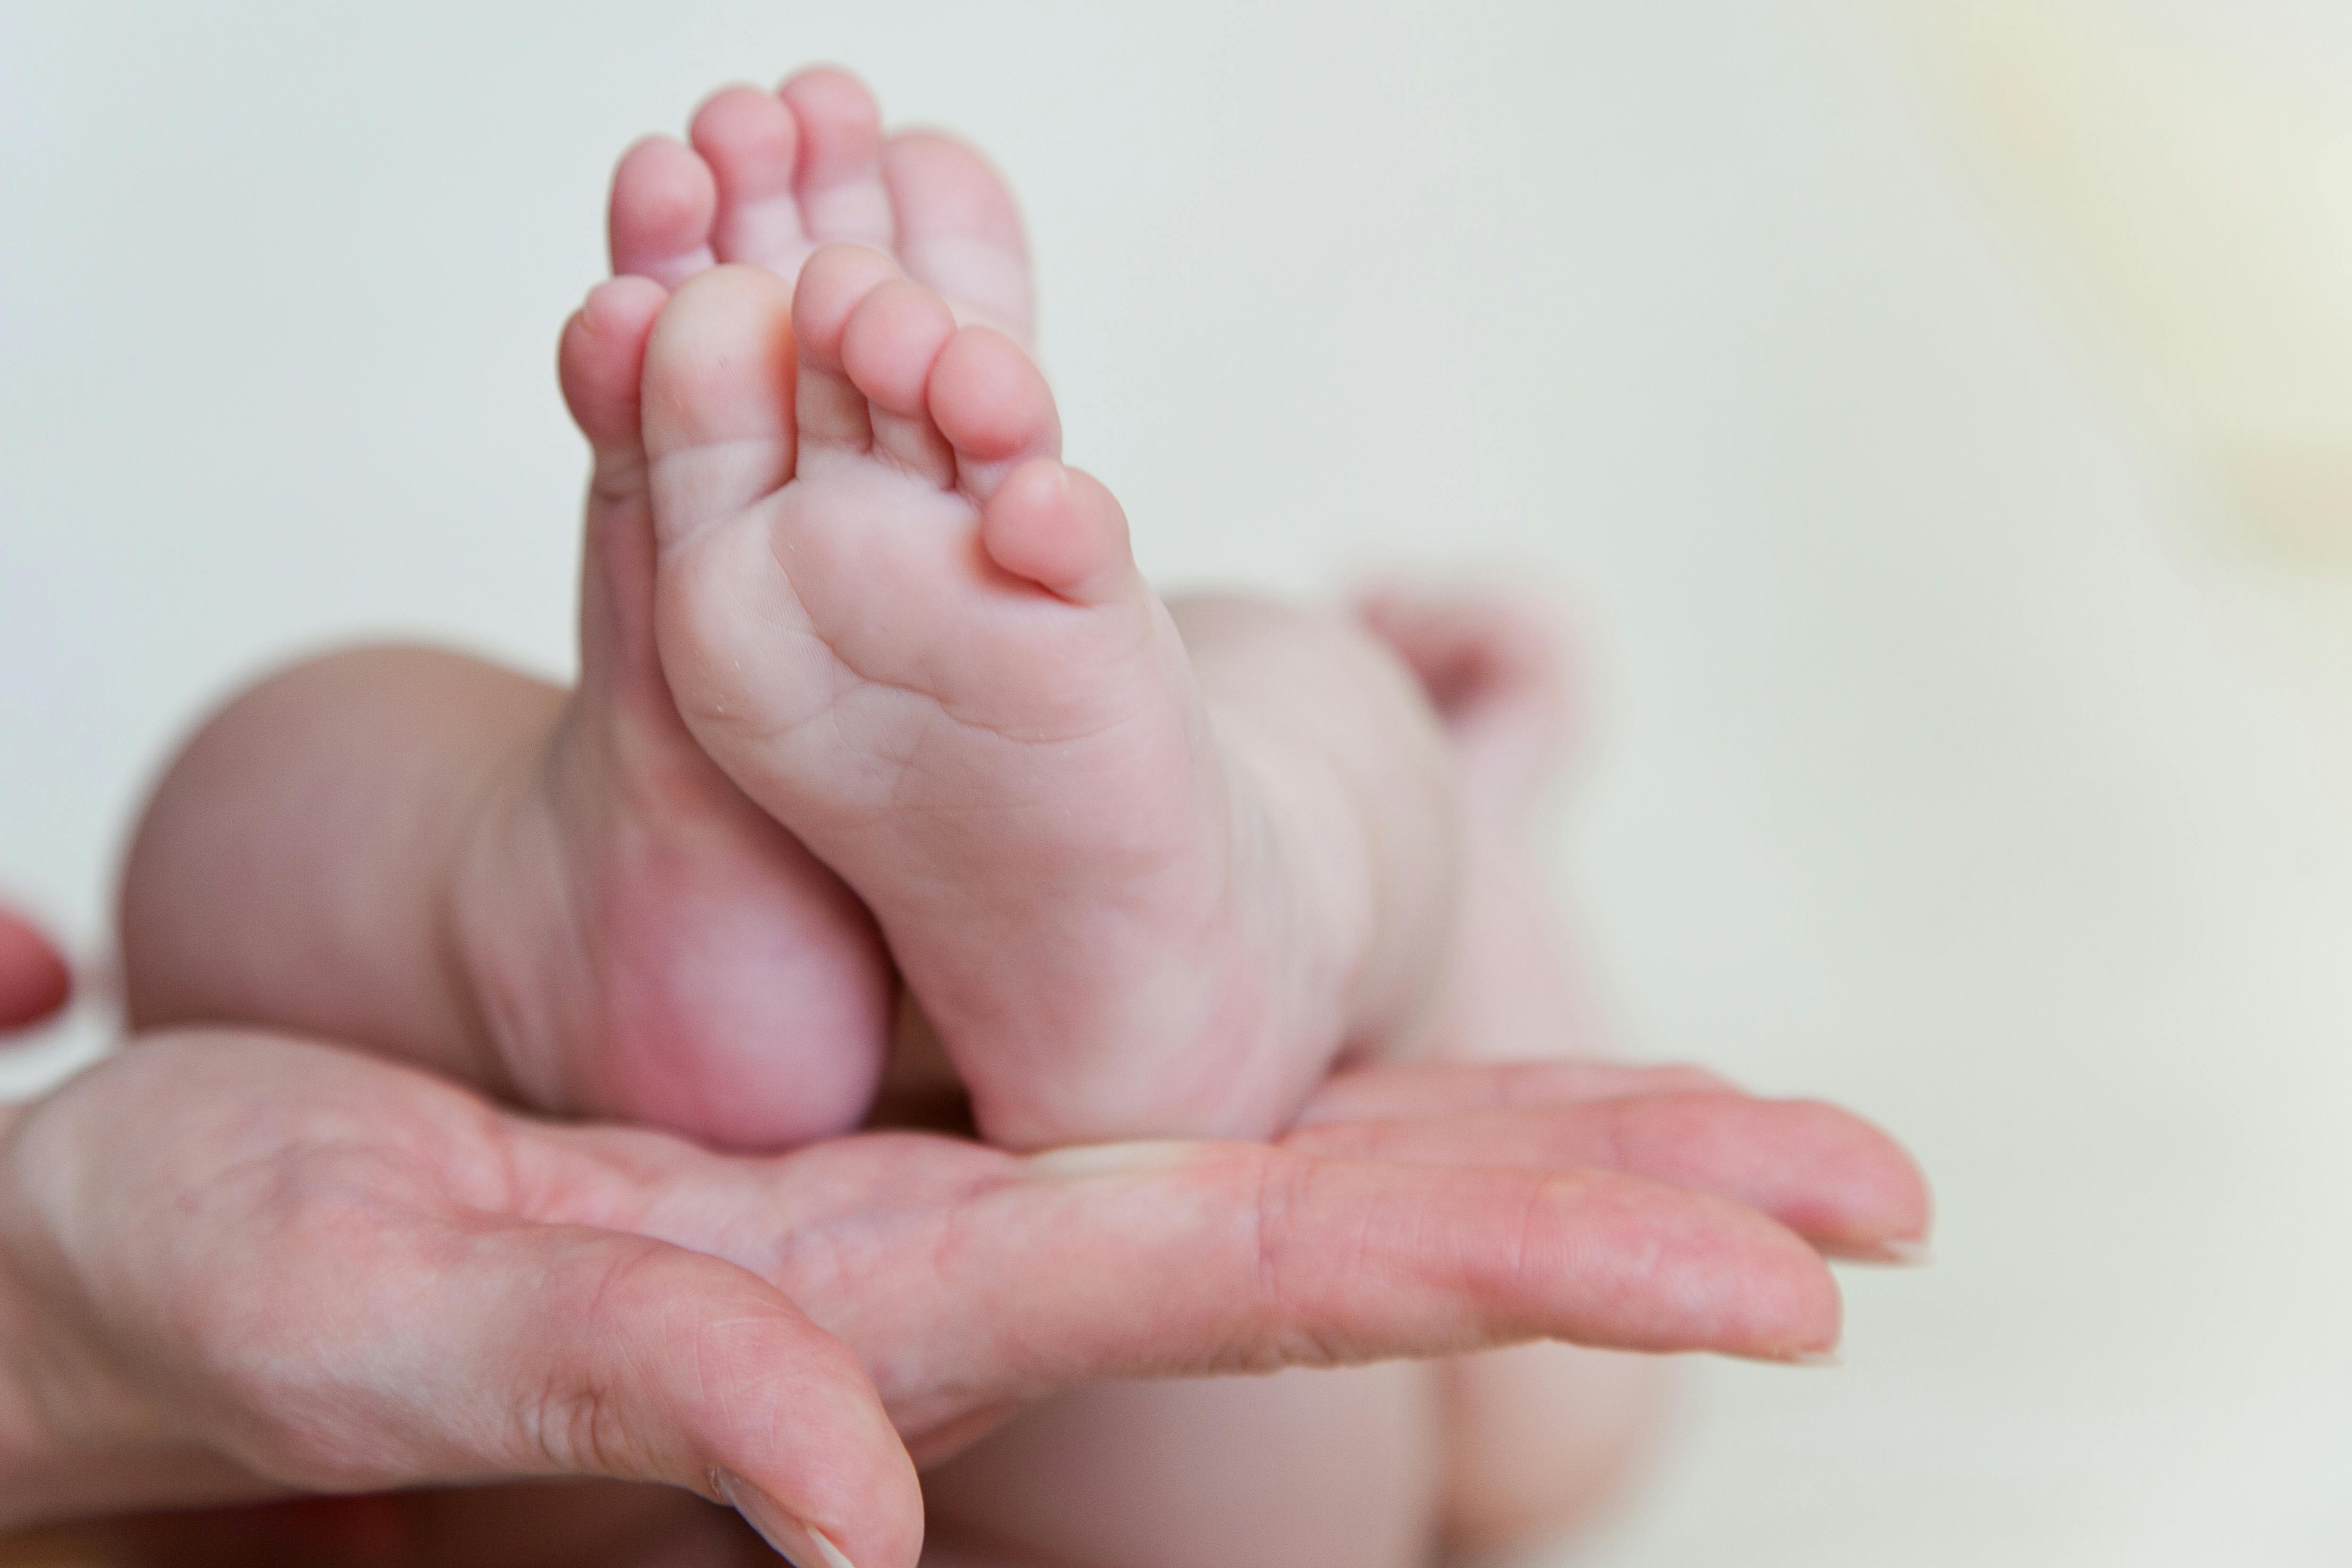 Newborn baby's foot - Stock Image - M815/0425 - Science Photo Library